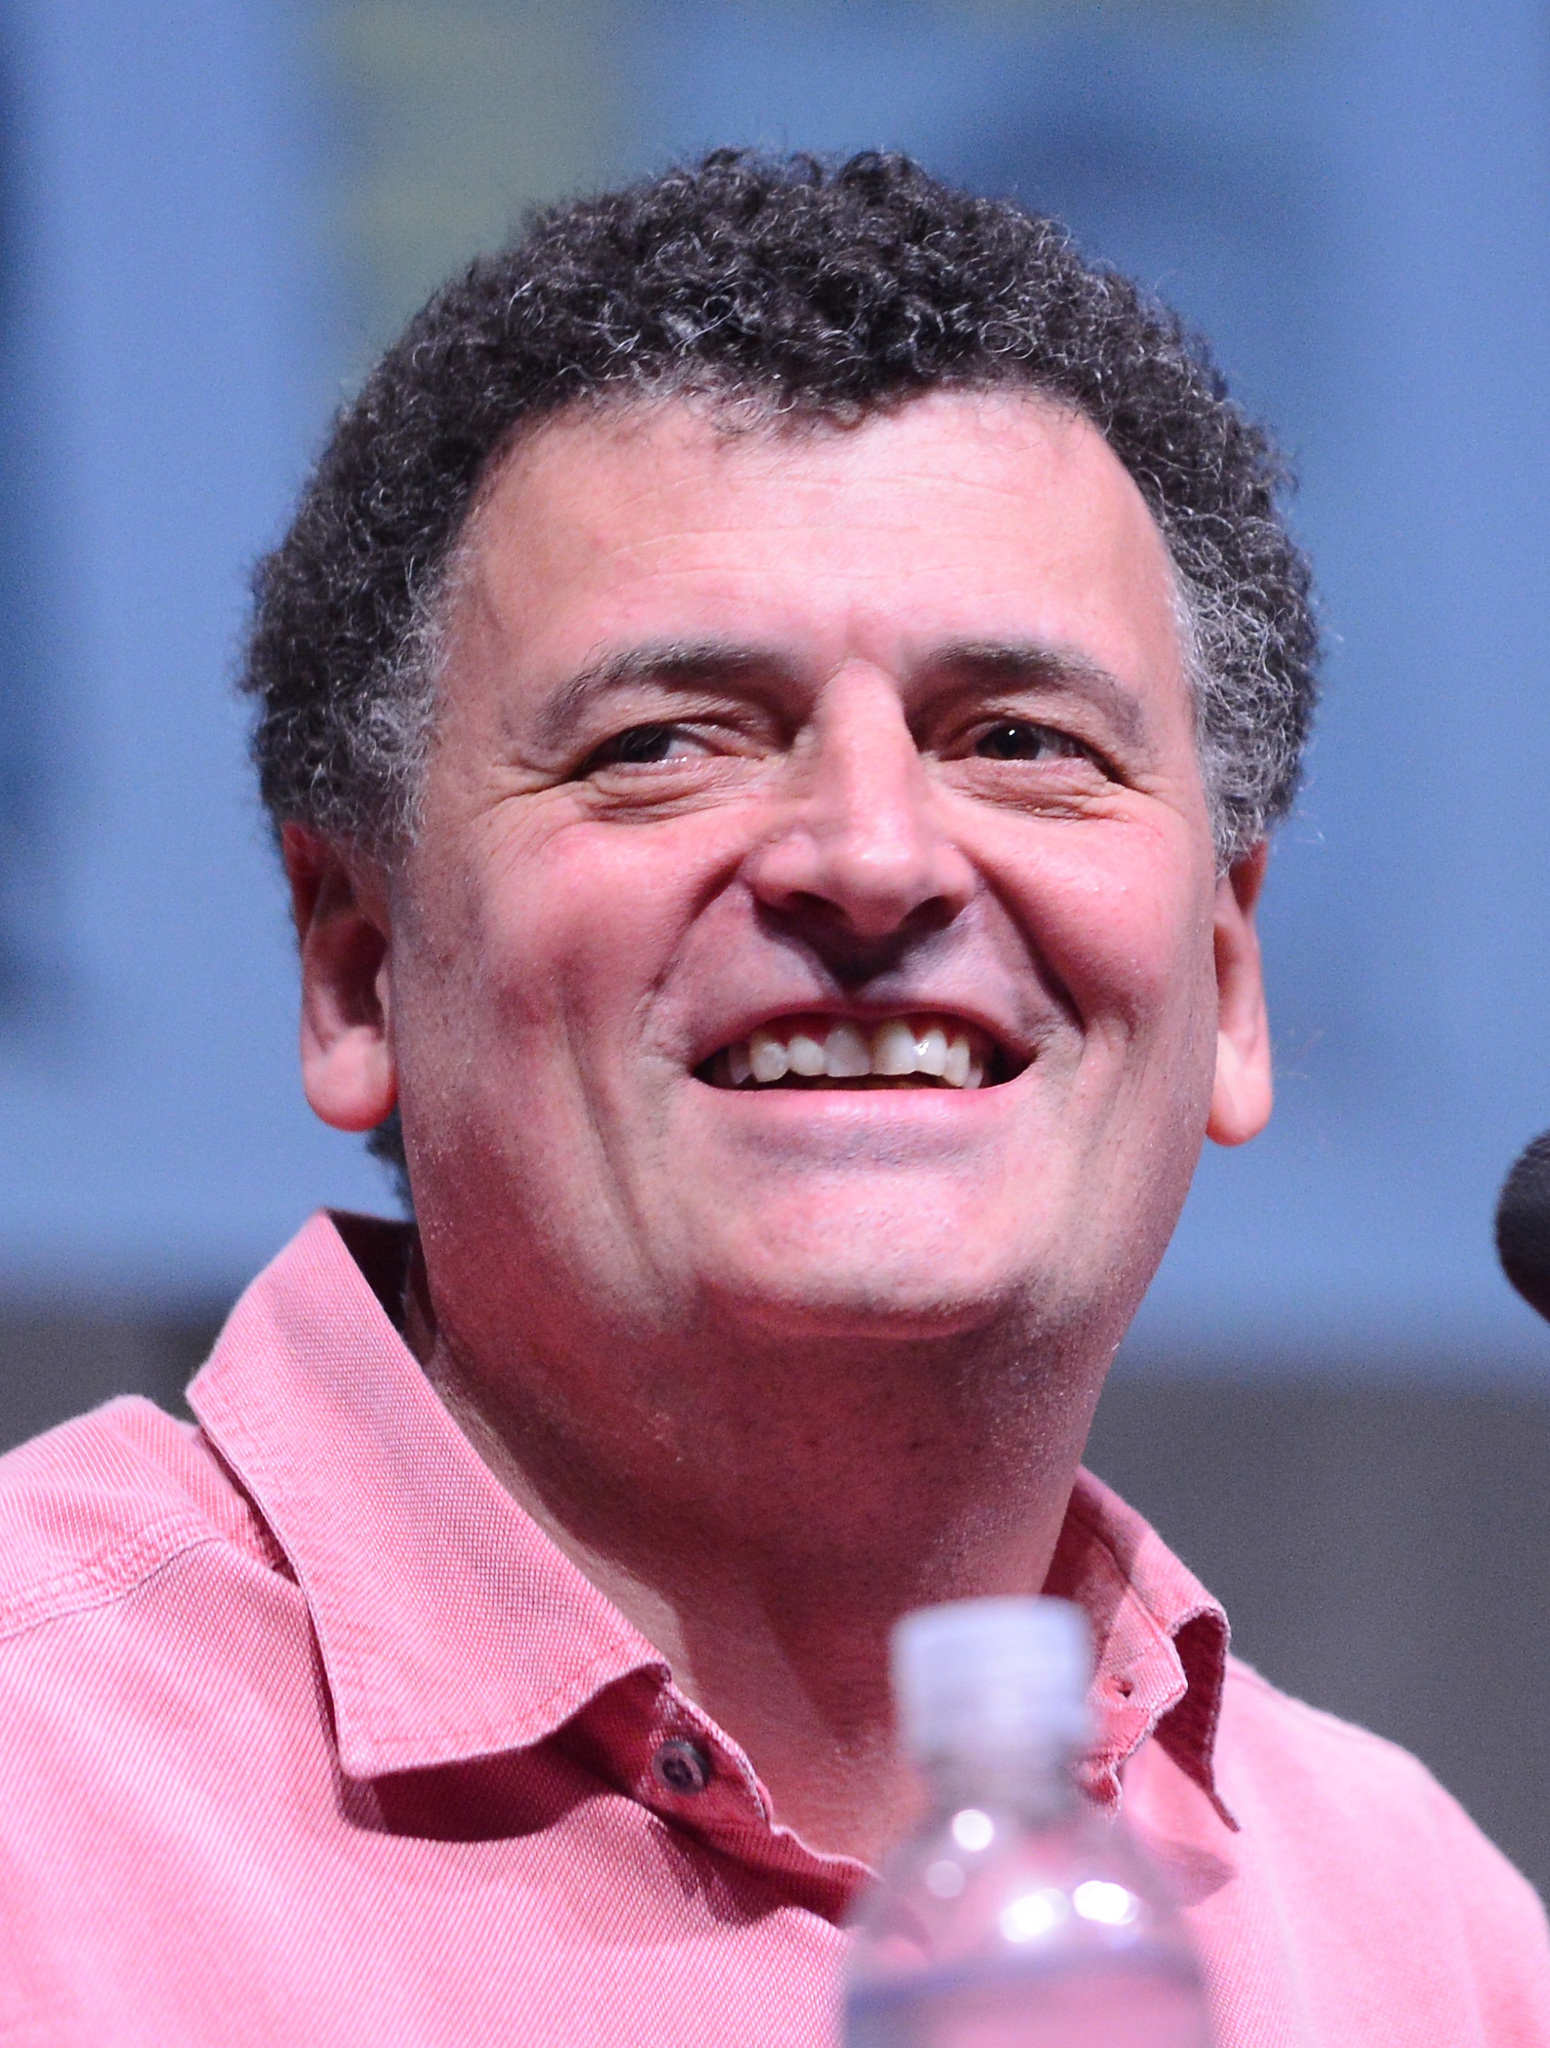 Steven Moffat at event of Doctor Who (2005)